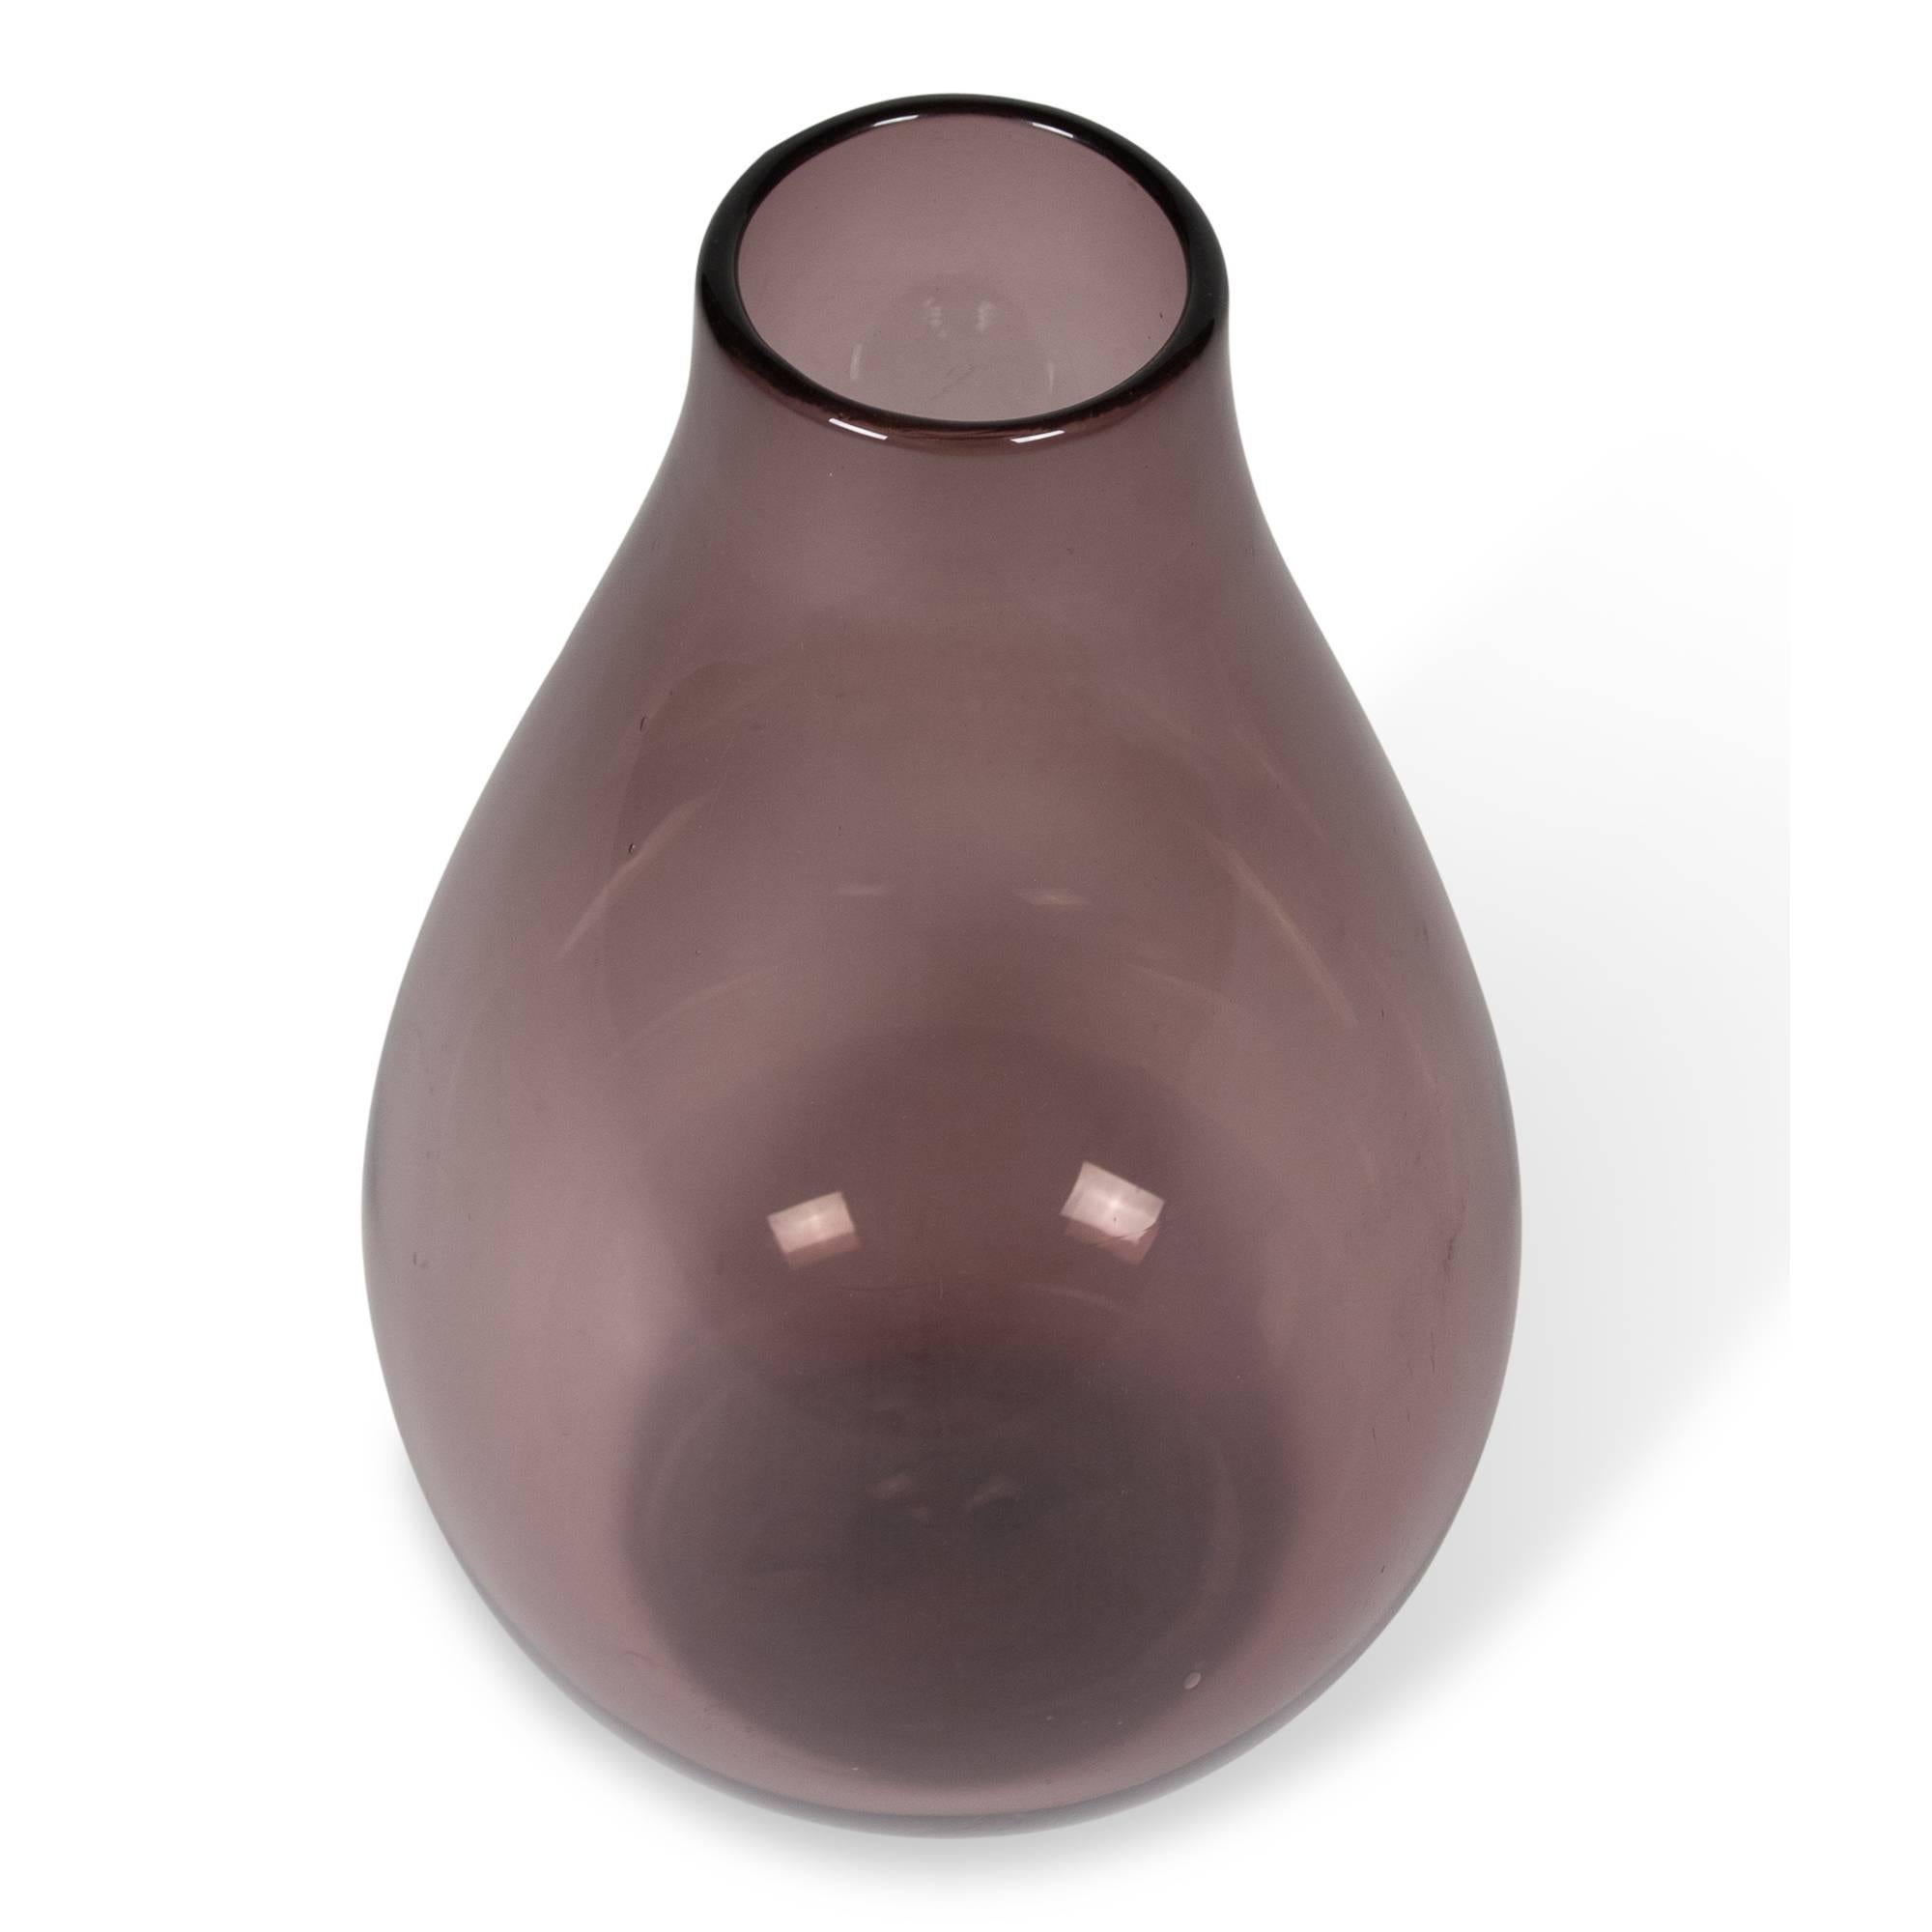 Large purple/aubergine colored glass vase, with a few scattered bubble inclusions, Murano, Italian, 1960s. Measures: 10 in. D at widest, 17 in. H. Unmarked. 